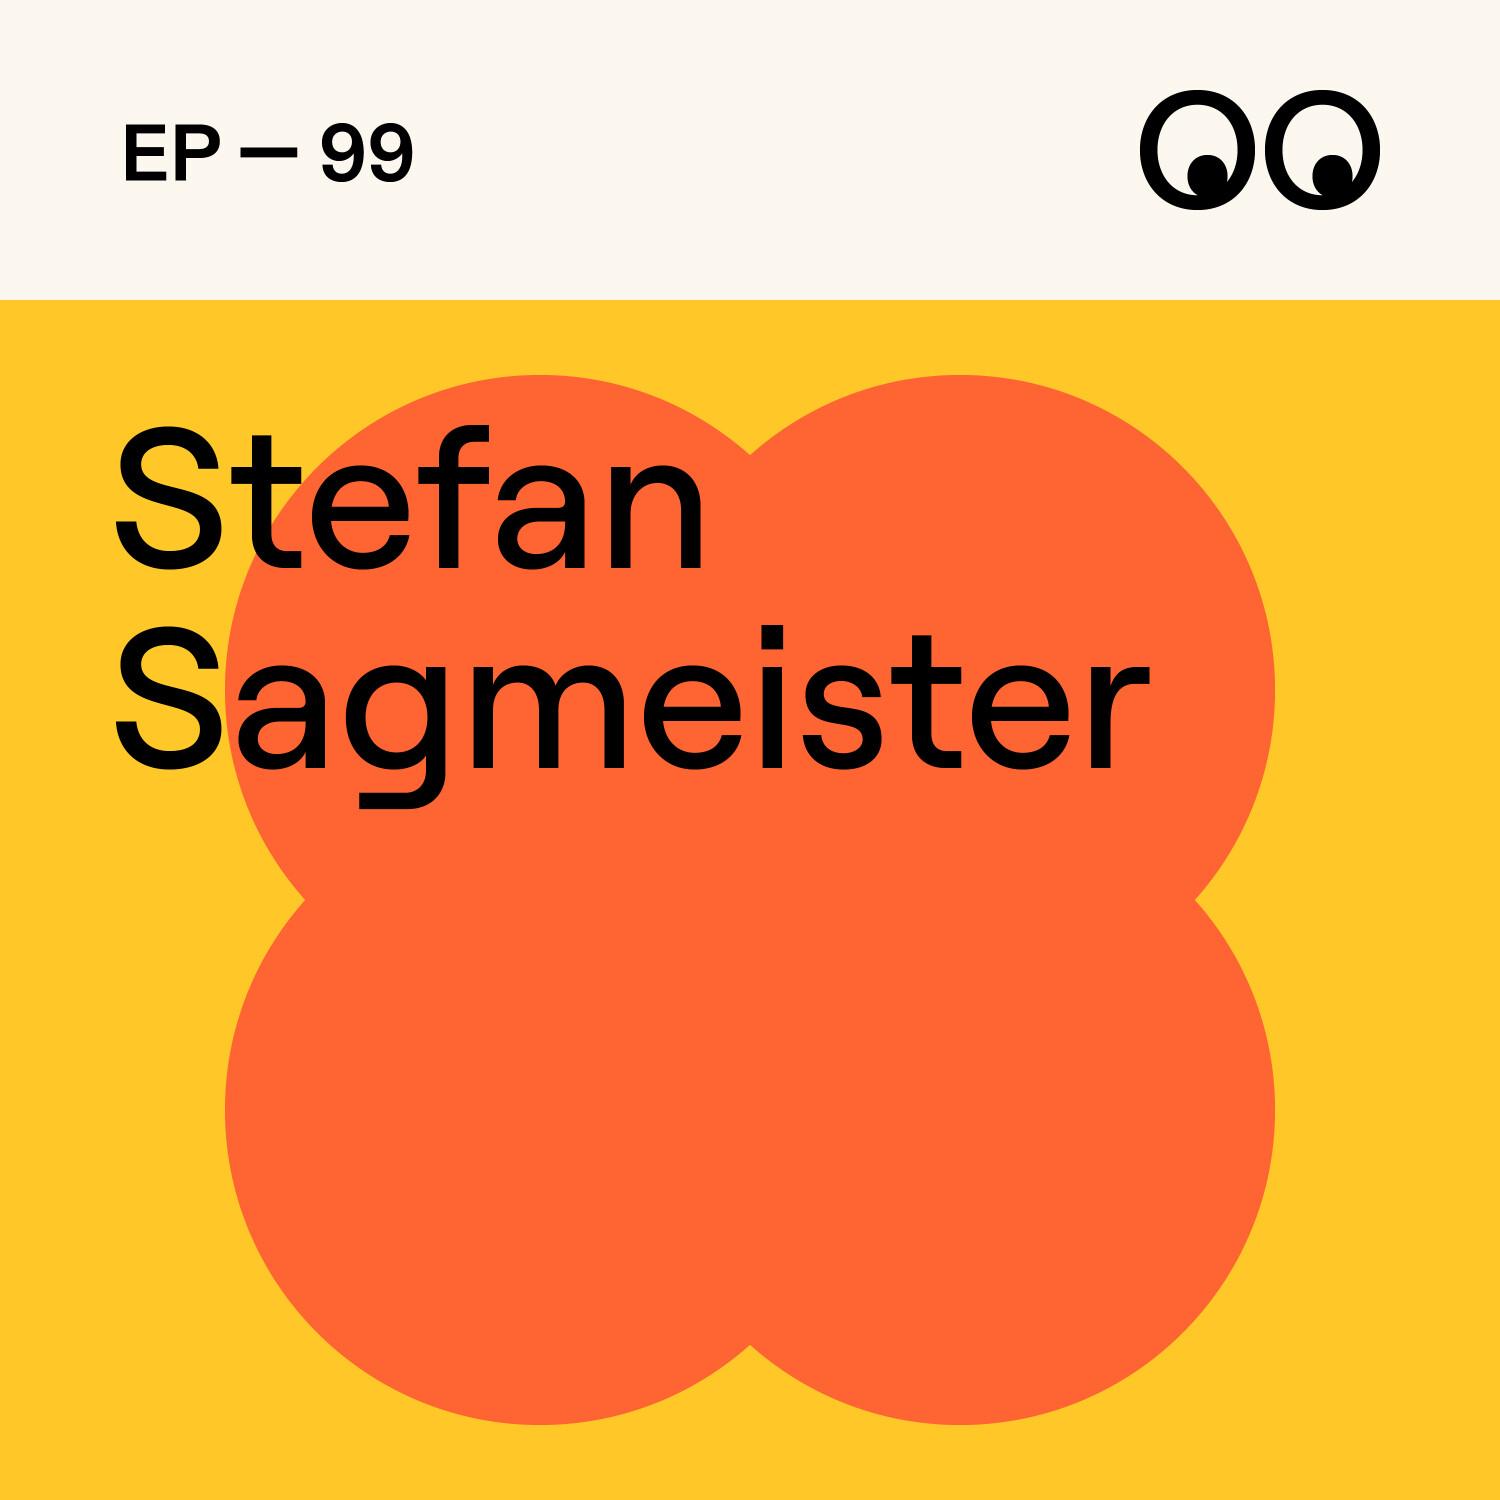 Why Now is Better, with Stefan Sagmeister